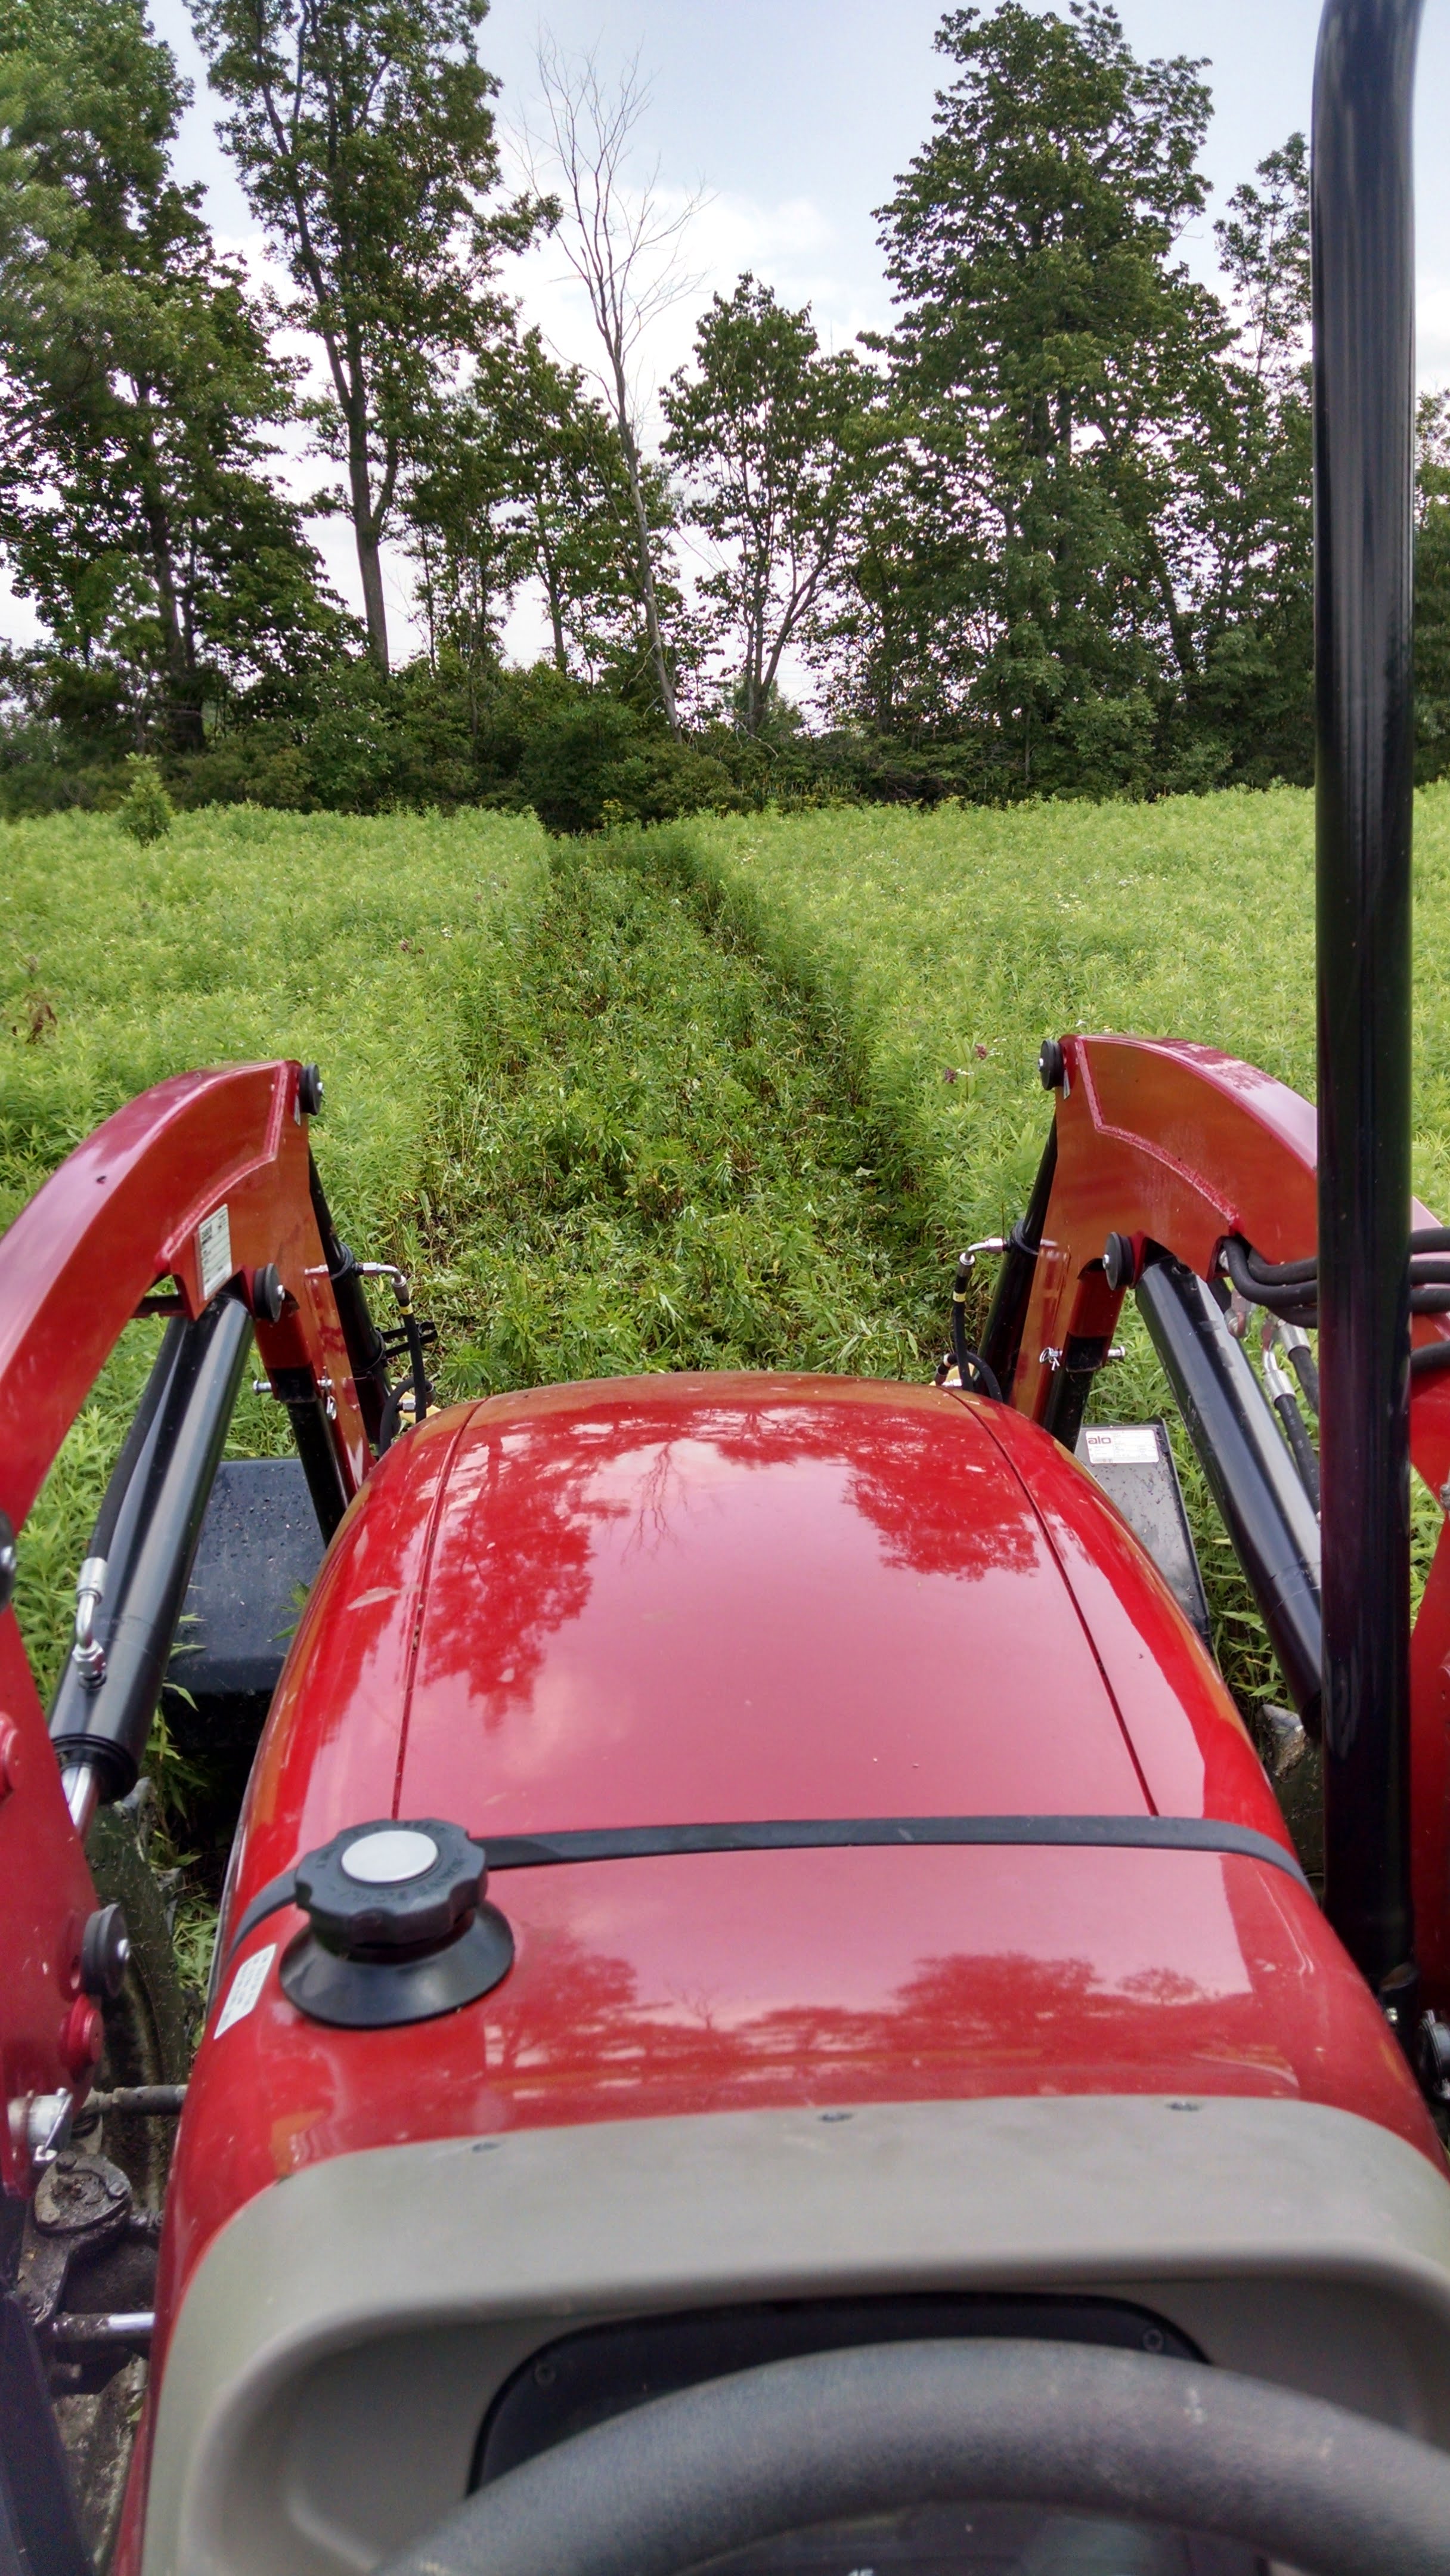 I can flatten the fencelines quickly with the back edge of the loader bucket.  Better results could be achieved with movers, crimper rollers, or some sort of dragged implement, but this is good enough and it doesn't require extra equipment or setup time.